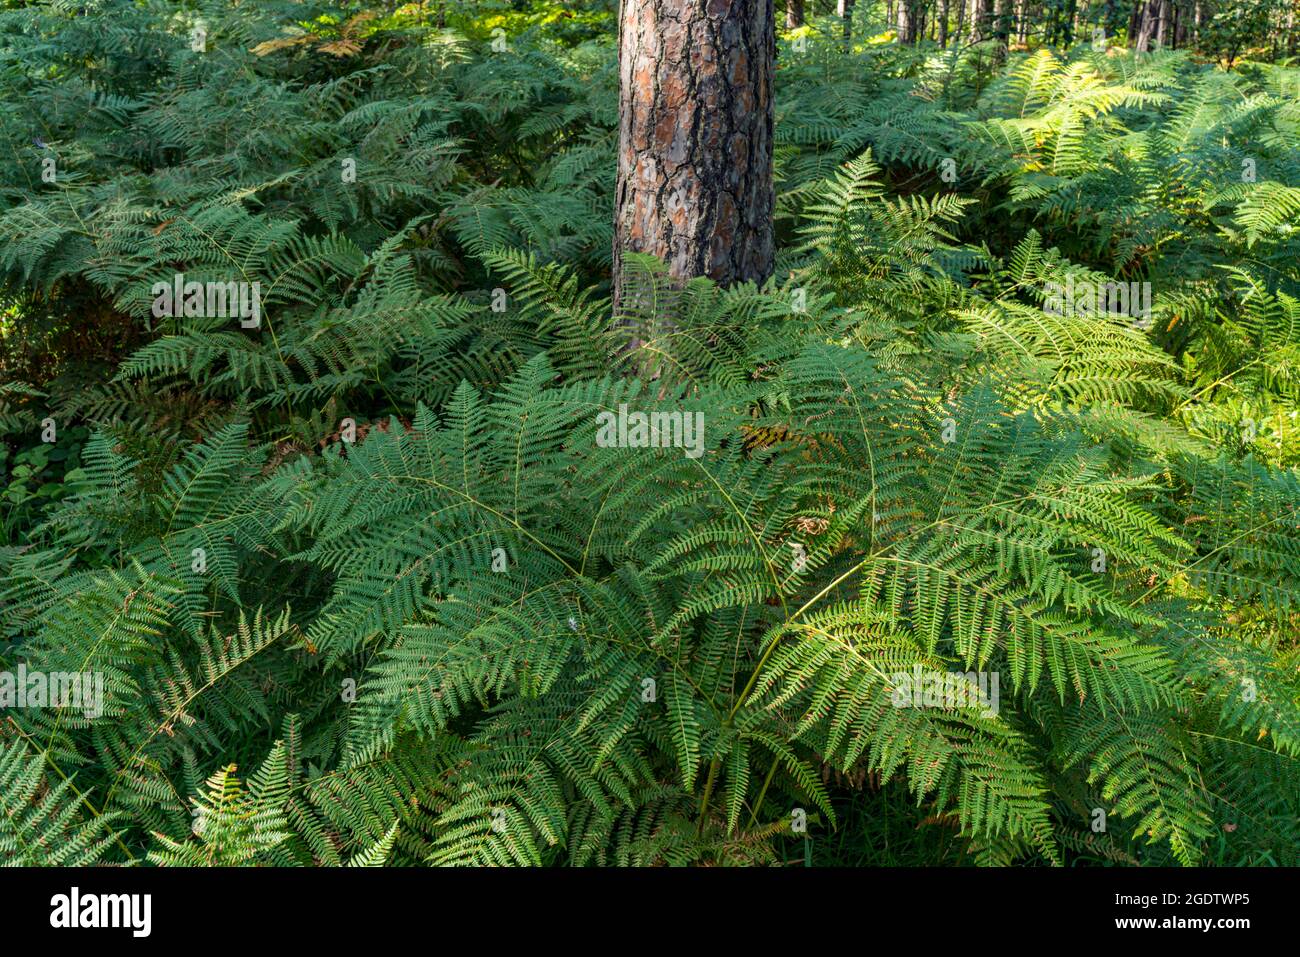 View at green ferns in the forest Stock Photo